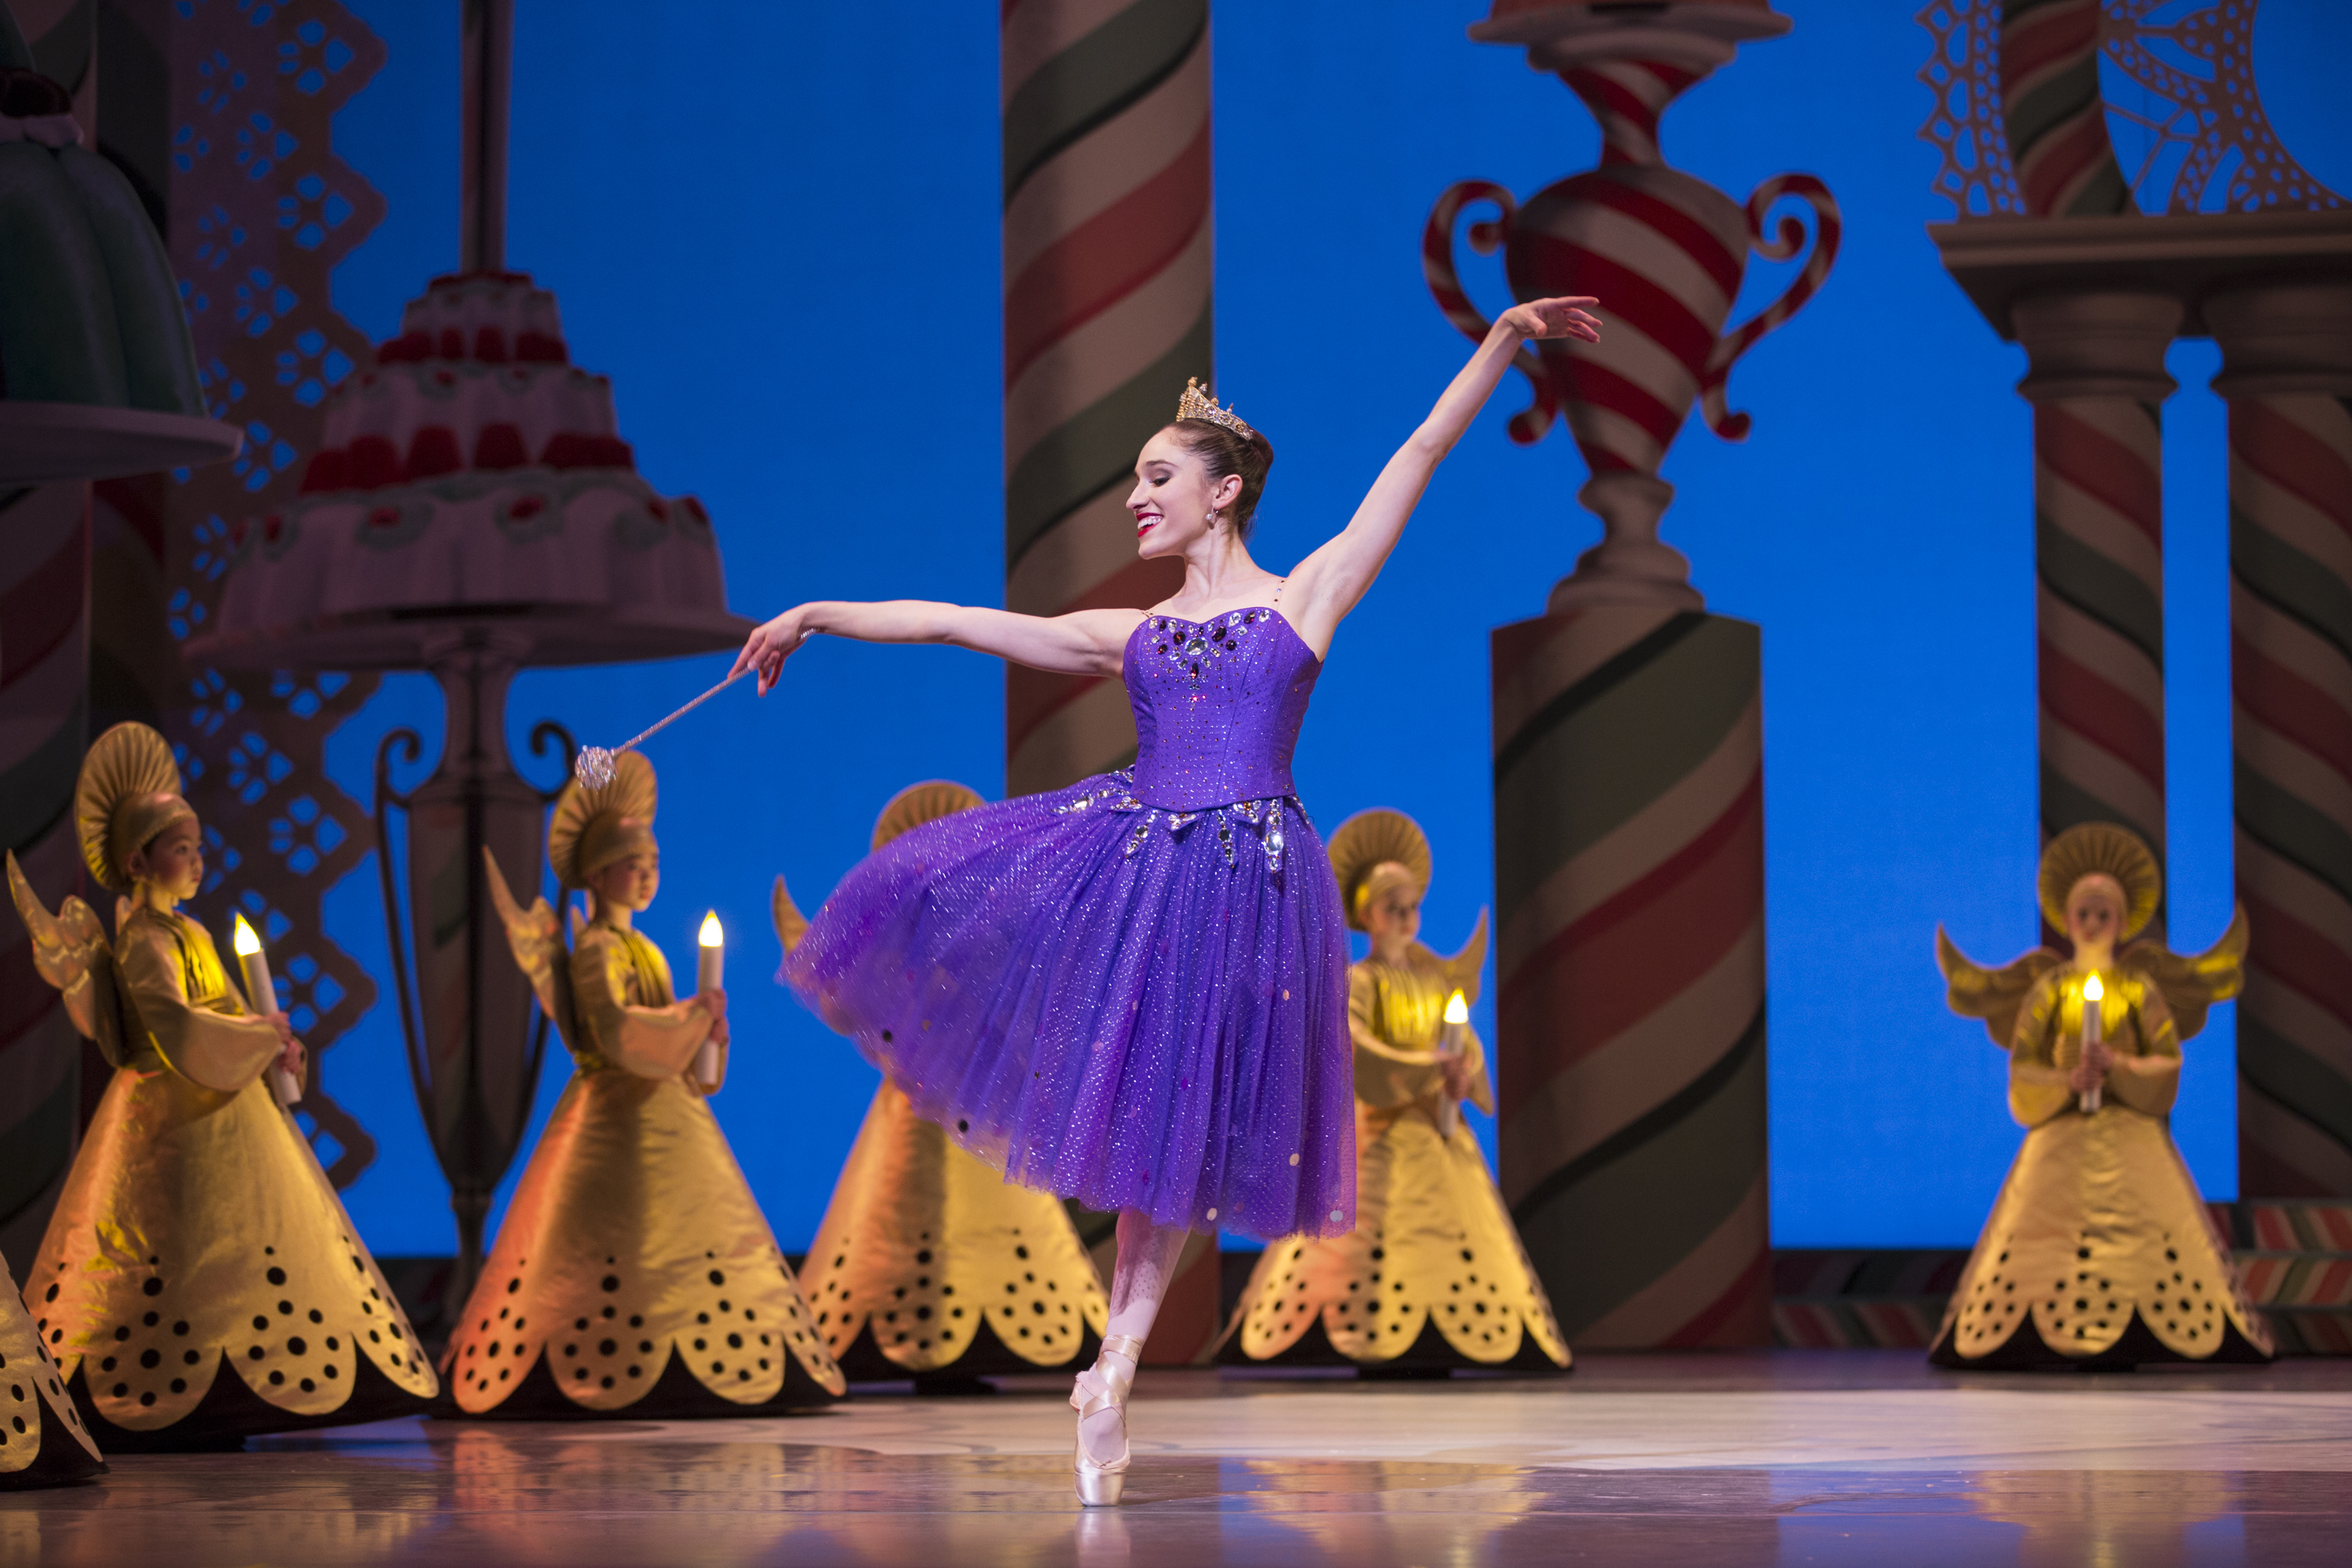 Pacific Northwest Ballet soloist Leta Biasucci as the Sugar Plum Fairy, with PNB School students in George Balanchine’s The Nutcracker®, choreographed by George Balanchine © The George Balanchine Trust. PNB’s production features sets and costumes designed by children’s author and illustrator Ian Falconer (Olivia the Pig) and runs November 25 – December 28, 2016. Photo © Angela Sterling.